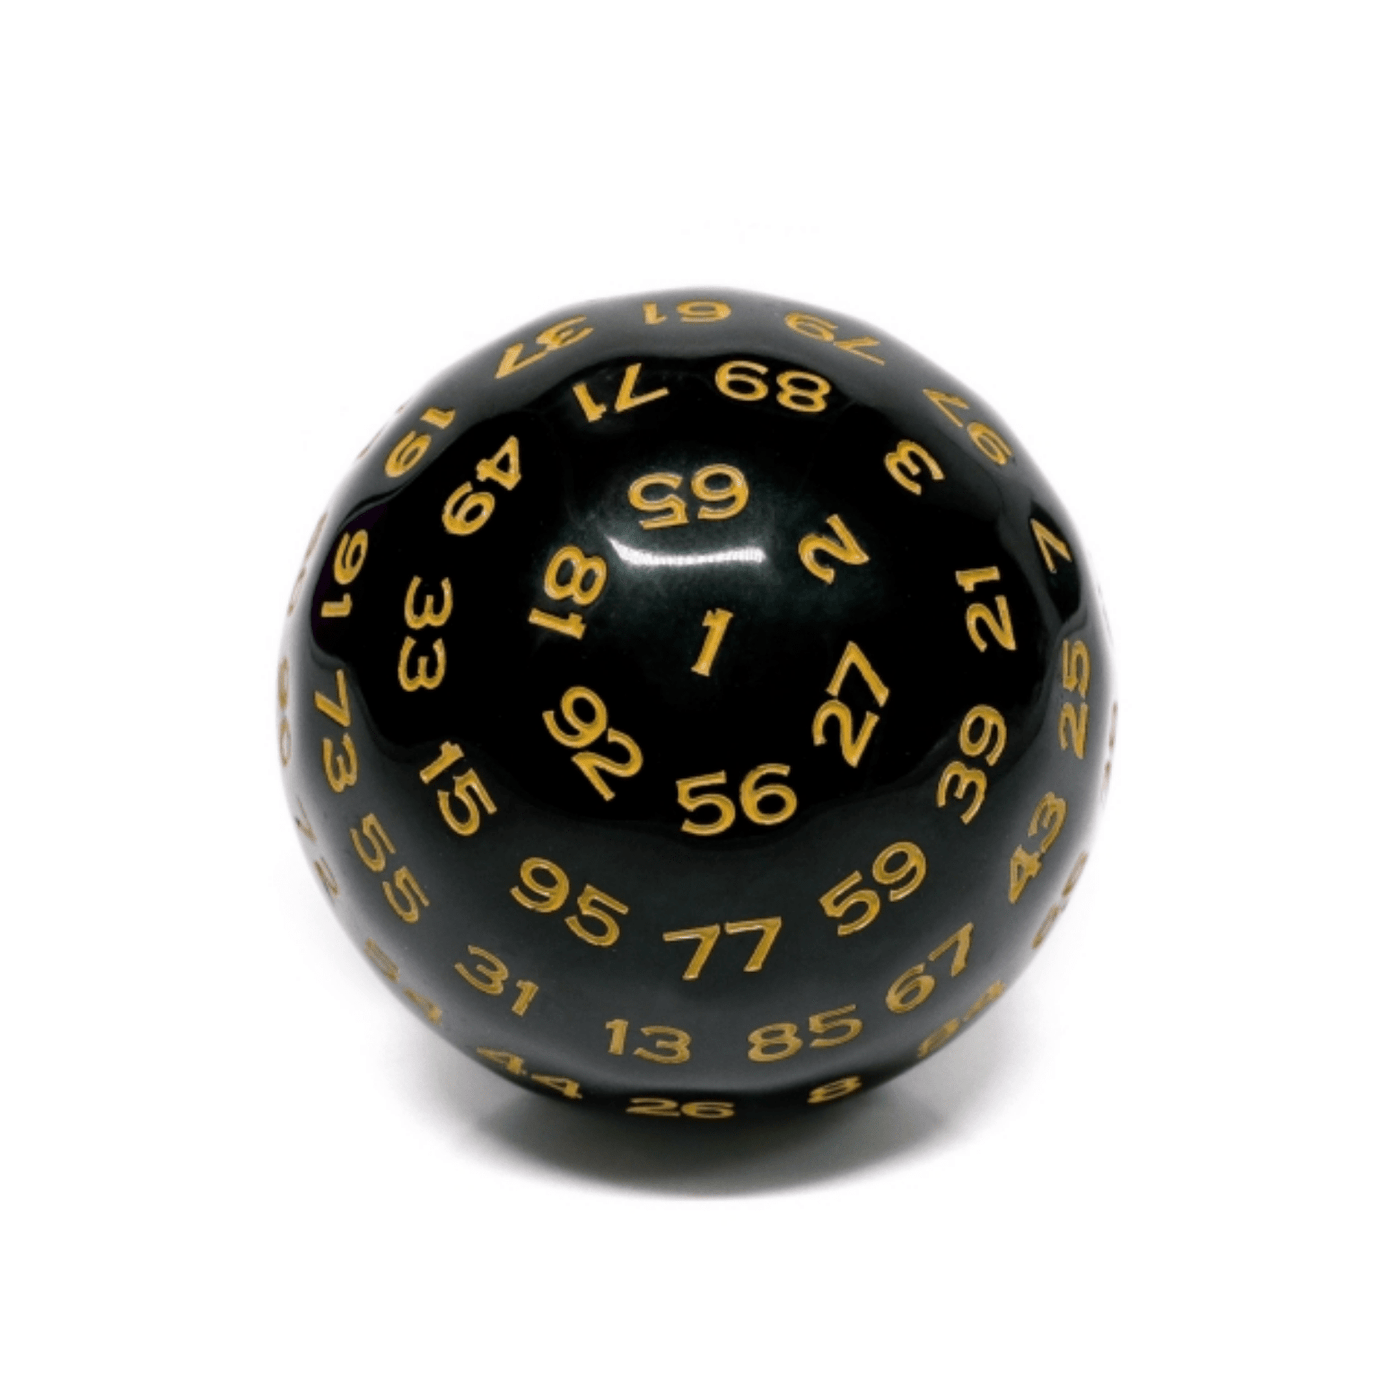 45mm D100 - Black Opaque with Yellow Plastic Dice Foam Brain Games